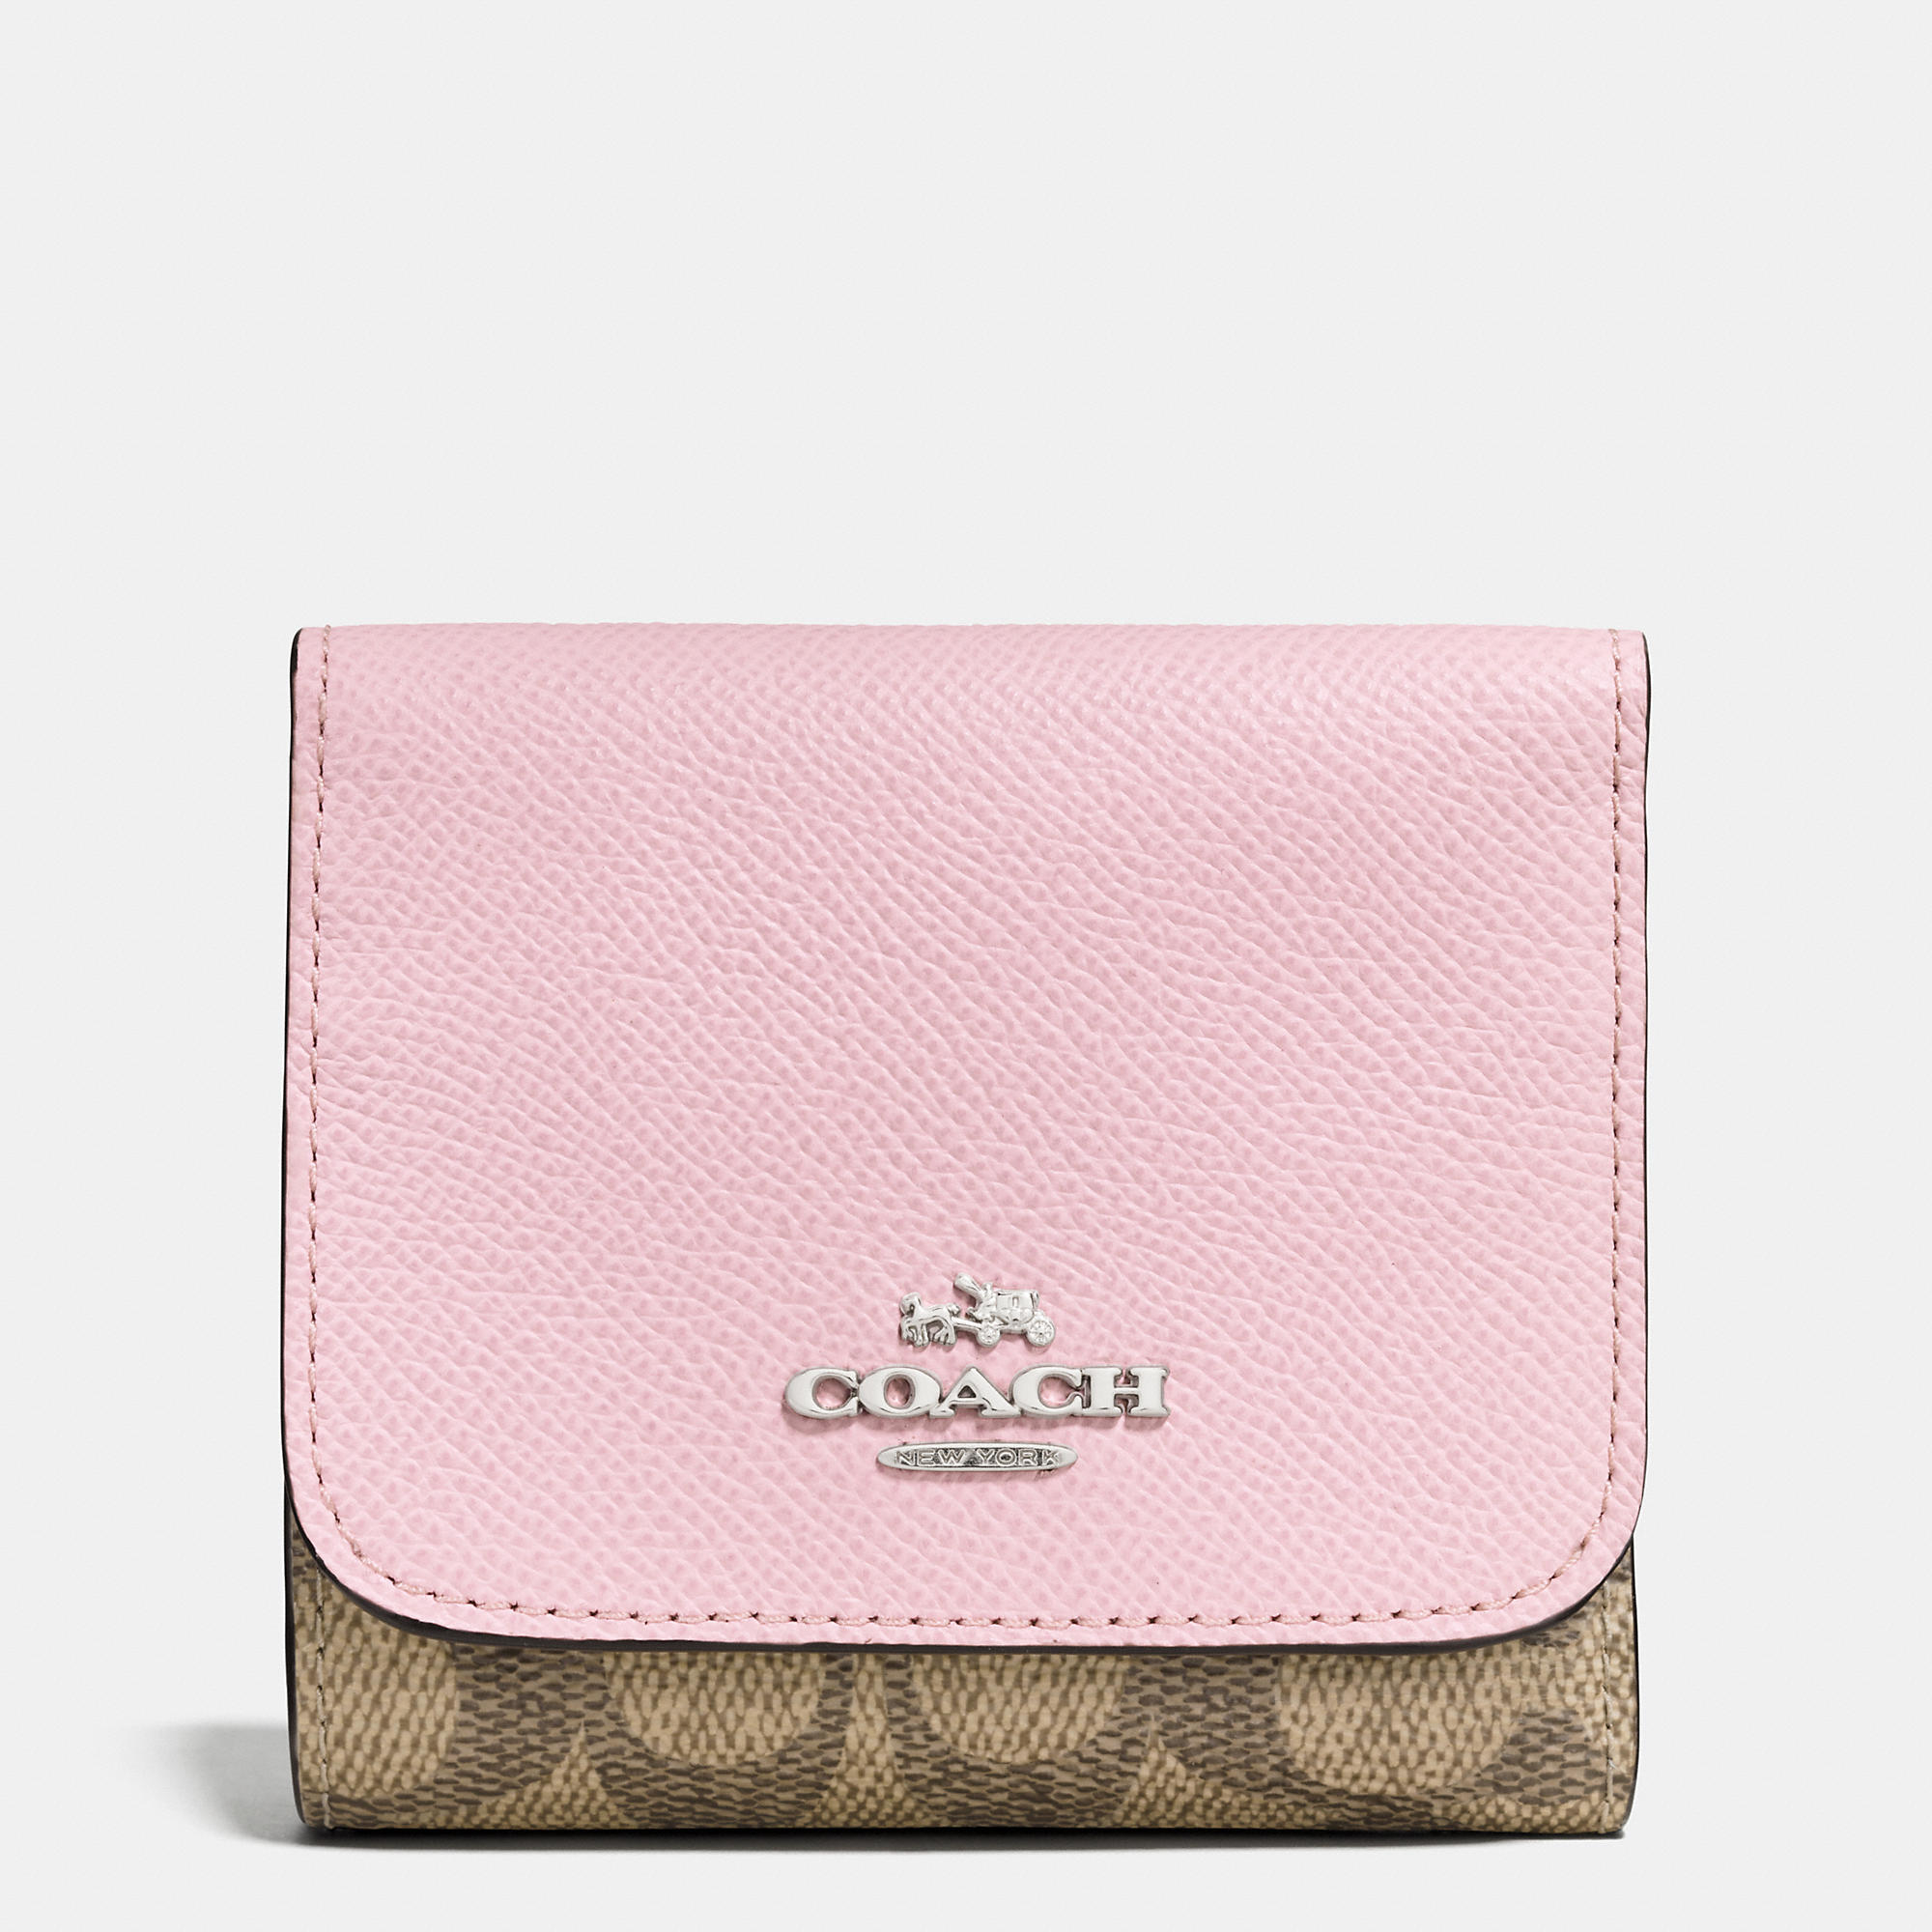 COACH Small Wallet In Colorblock Signature Coated Canvas in Natural - Lyst